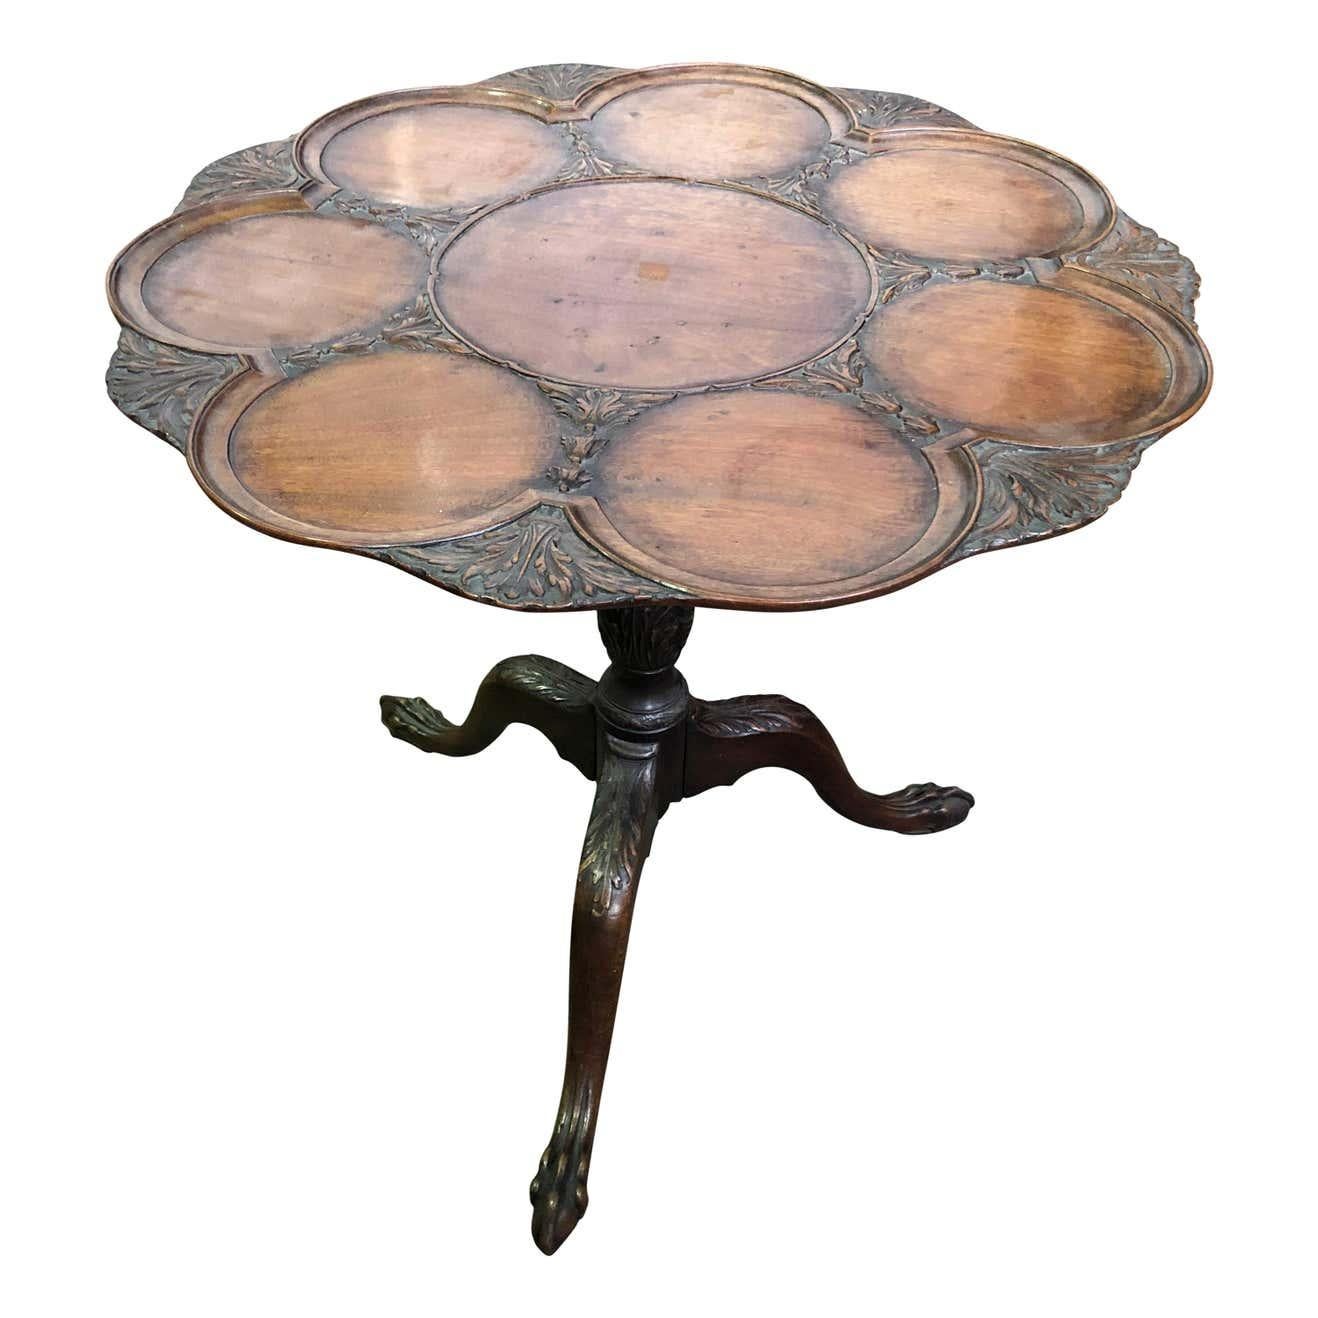 A Gorgeous mahogany Georgian style circular tilt-top supper table with eight place settings. With an acanthus-carved tripod base.